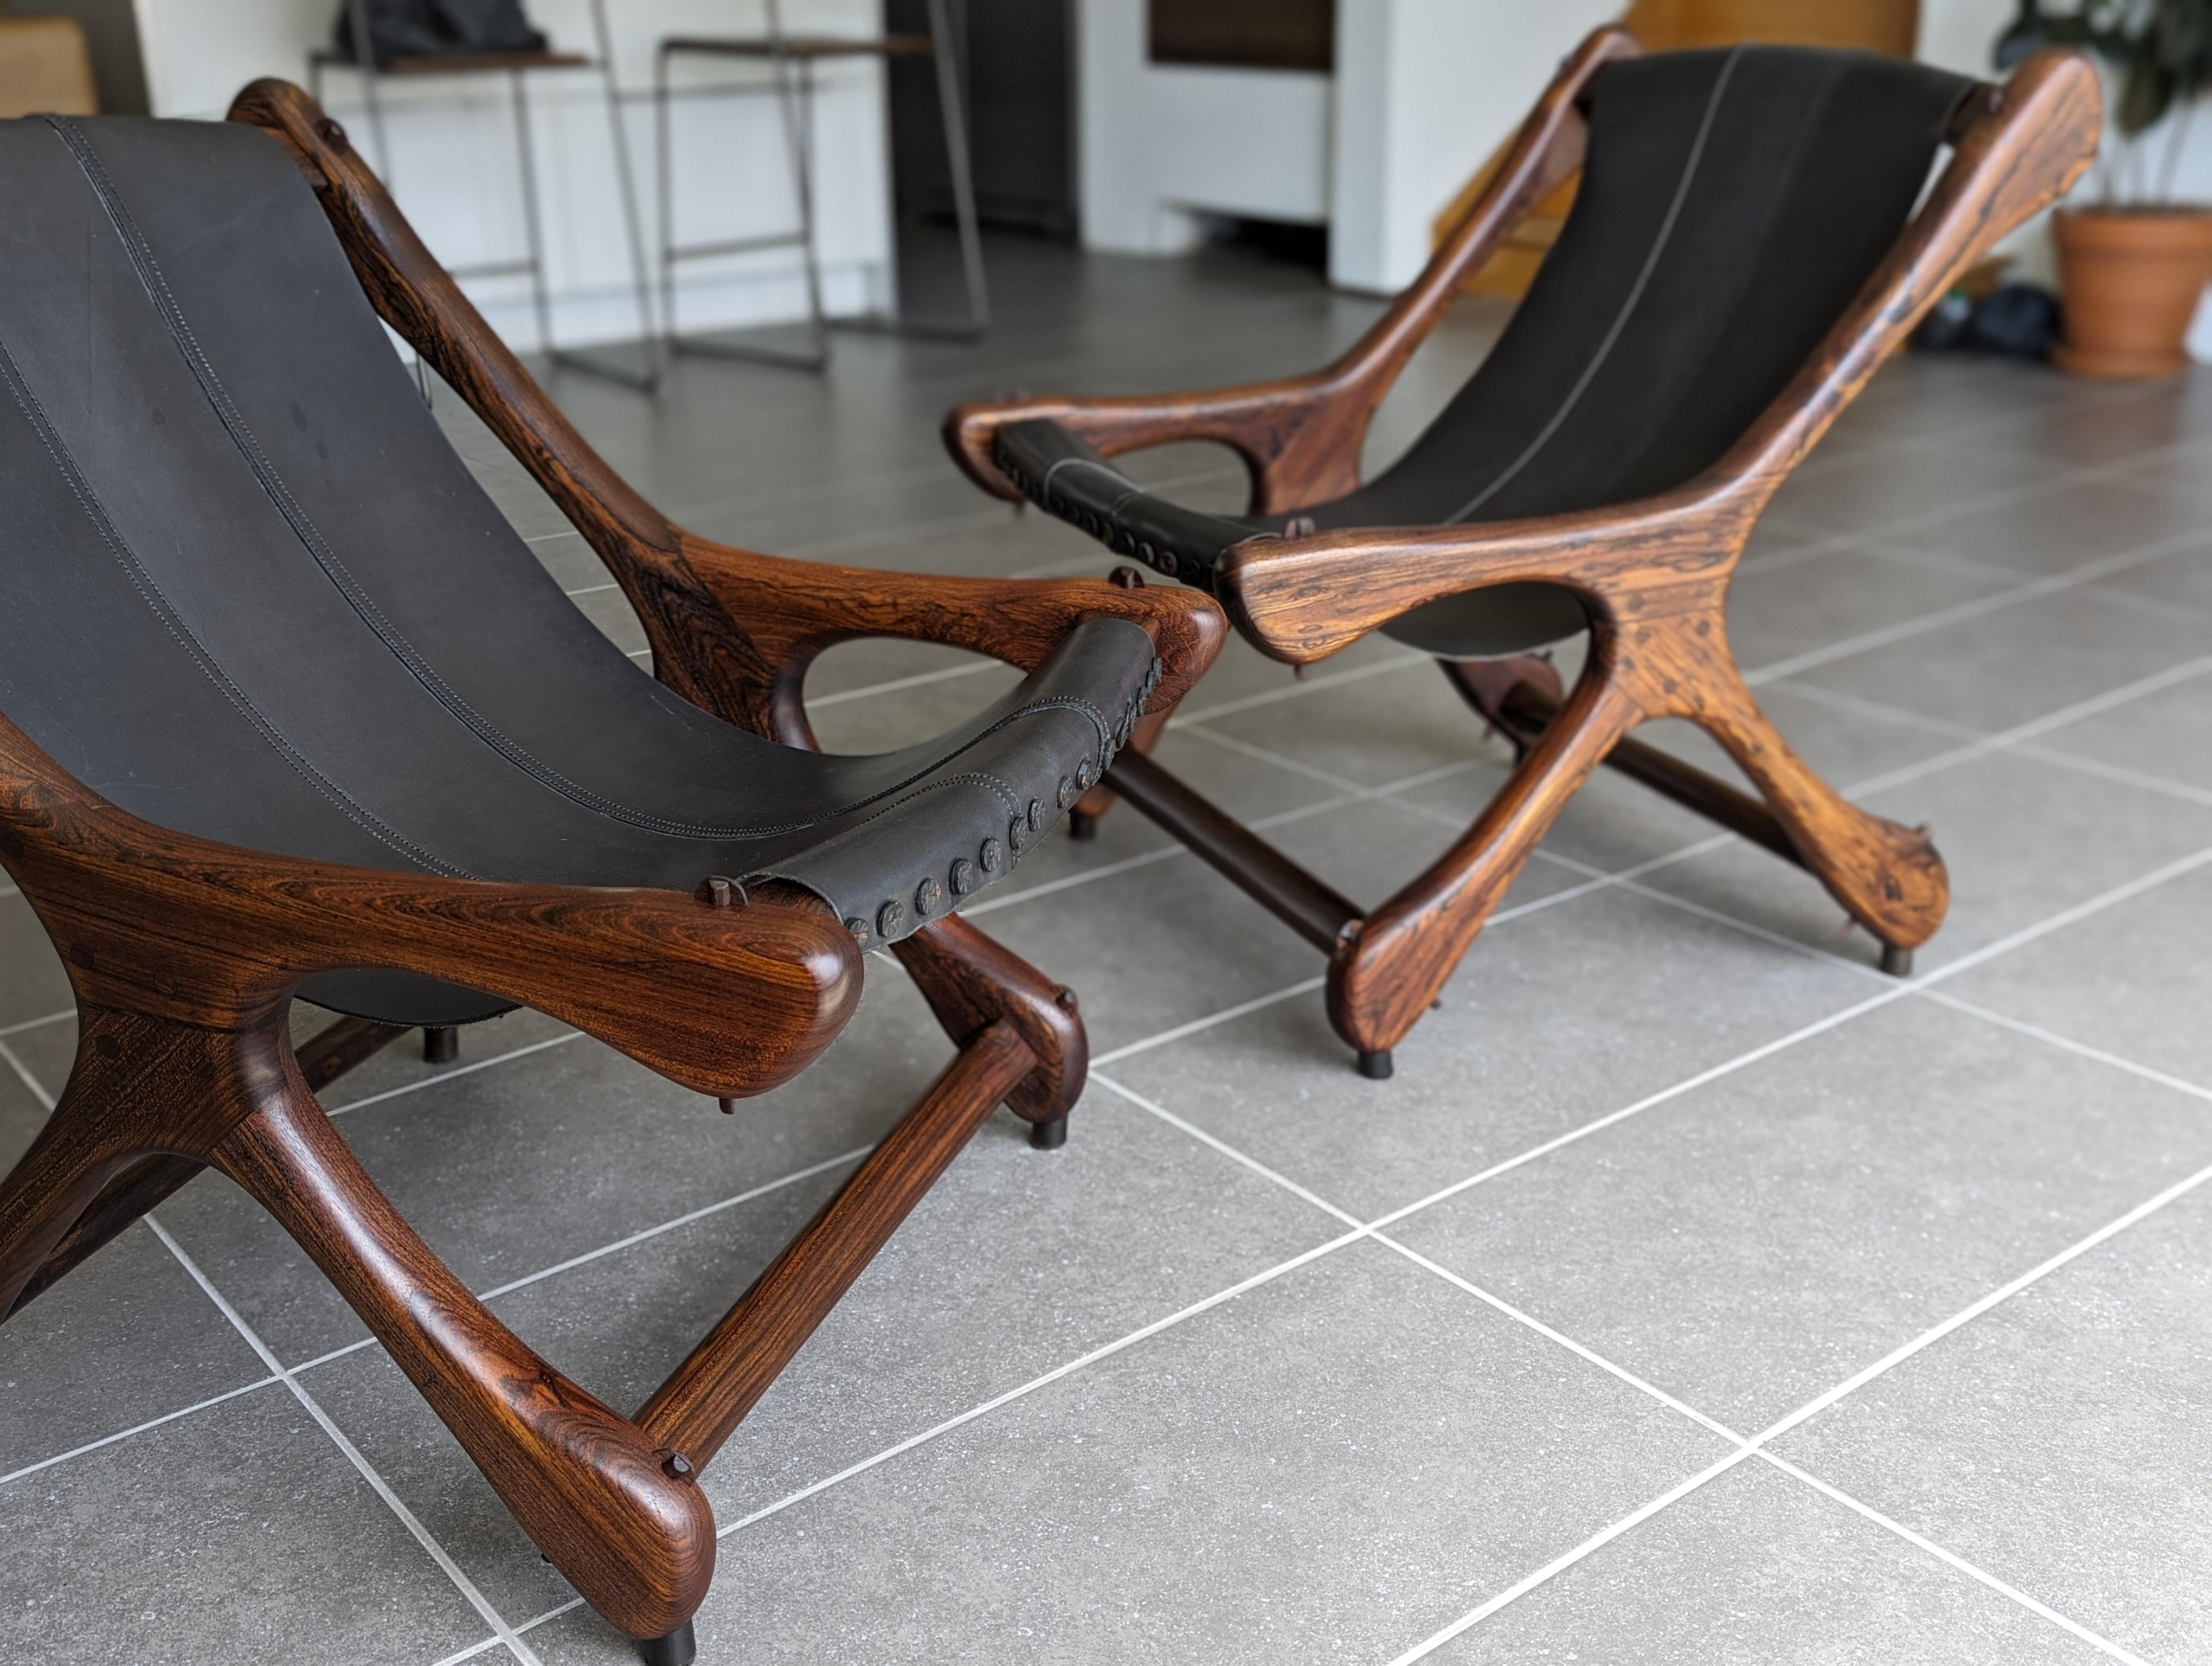 Mid-Century Modern Don Shoemaker Sloucher Rosewood & Leather Sling Chairs for Señal, S.A., 1960s For Sale